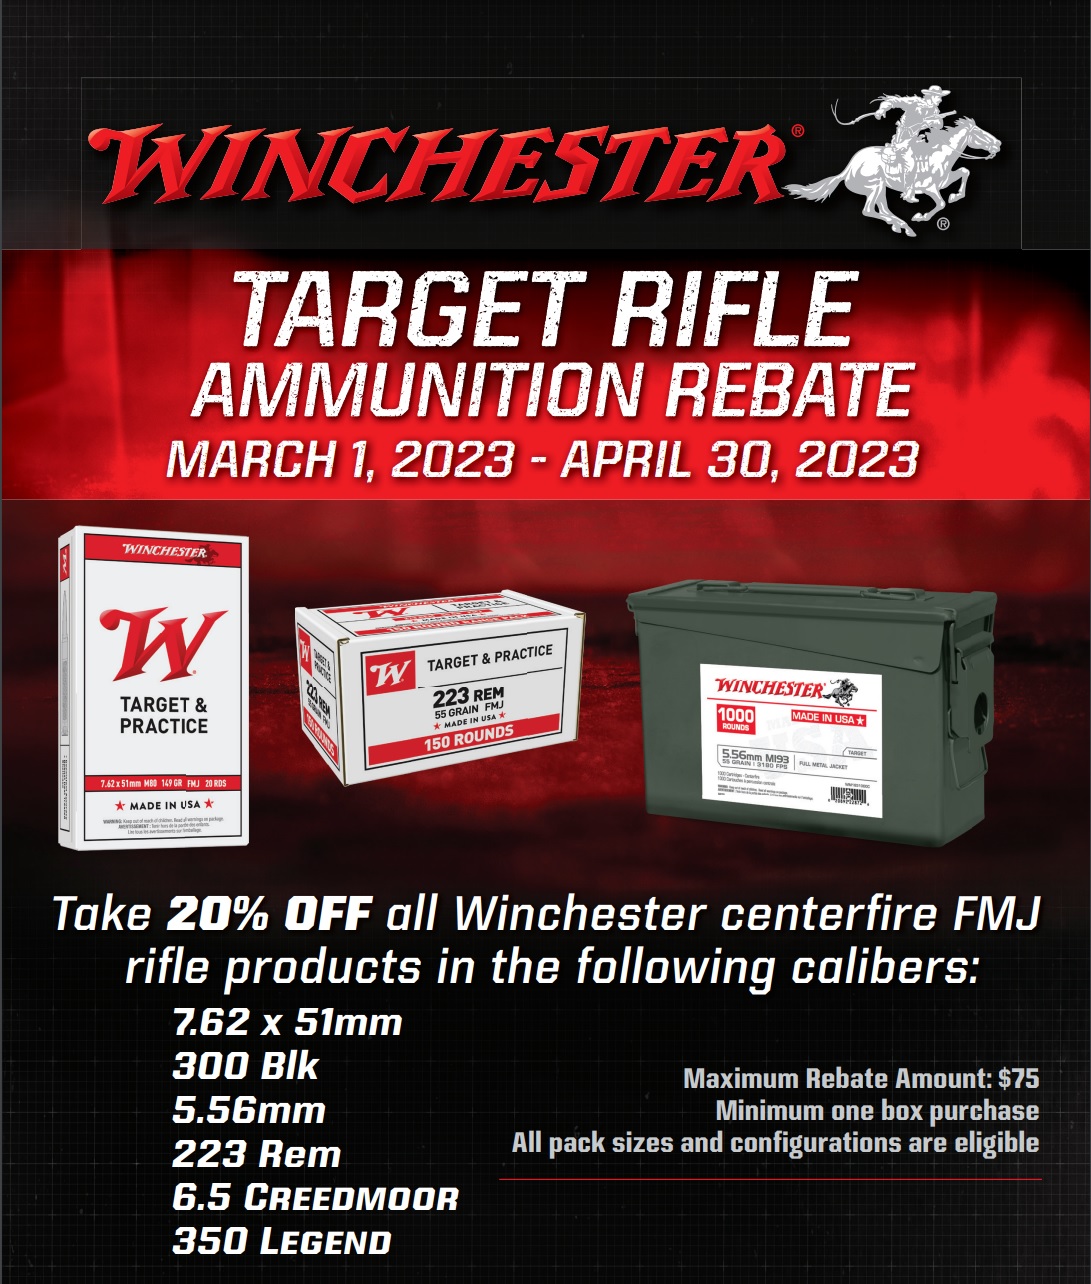 ammo-deals-winchester-lake-city-5-56mm-55gr-fmj-ammo-1000rnds-374-99